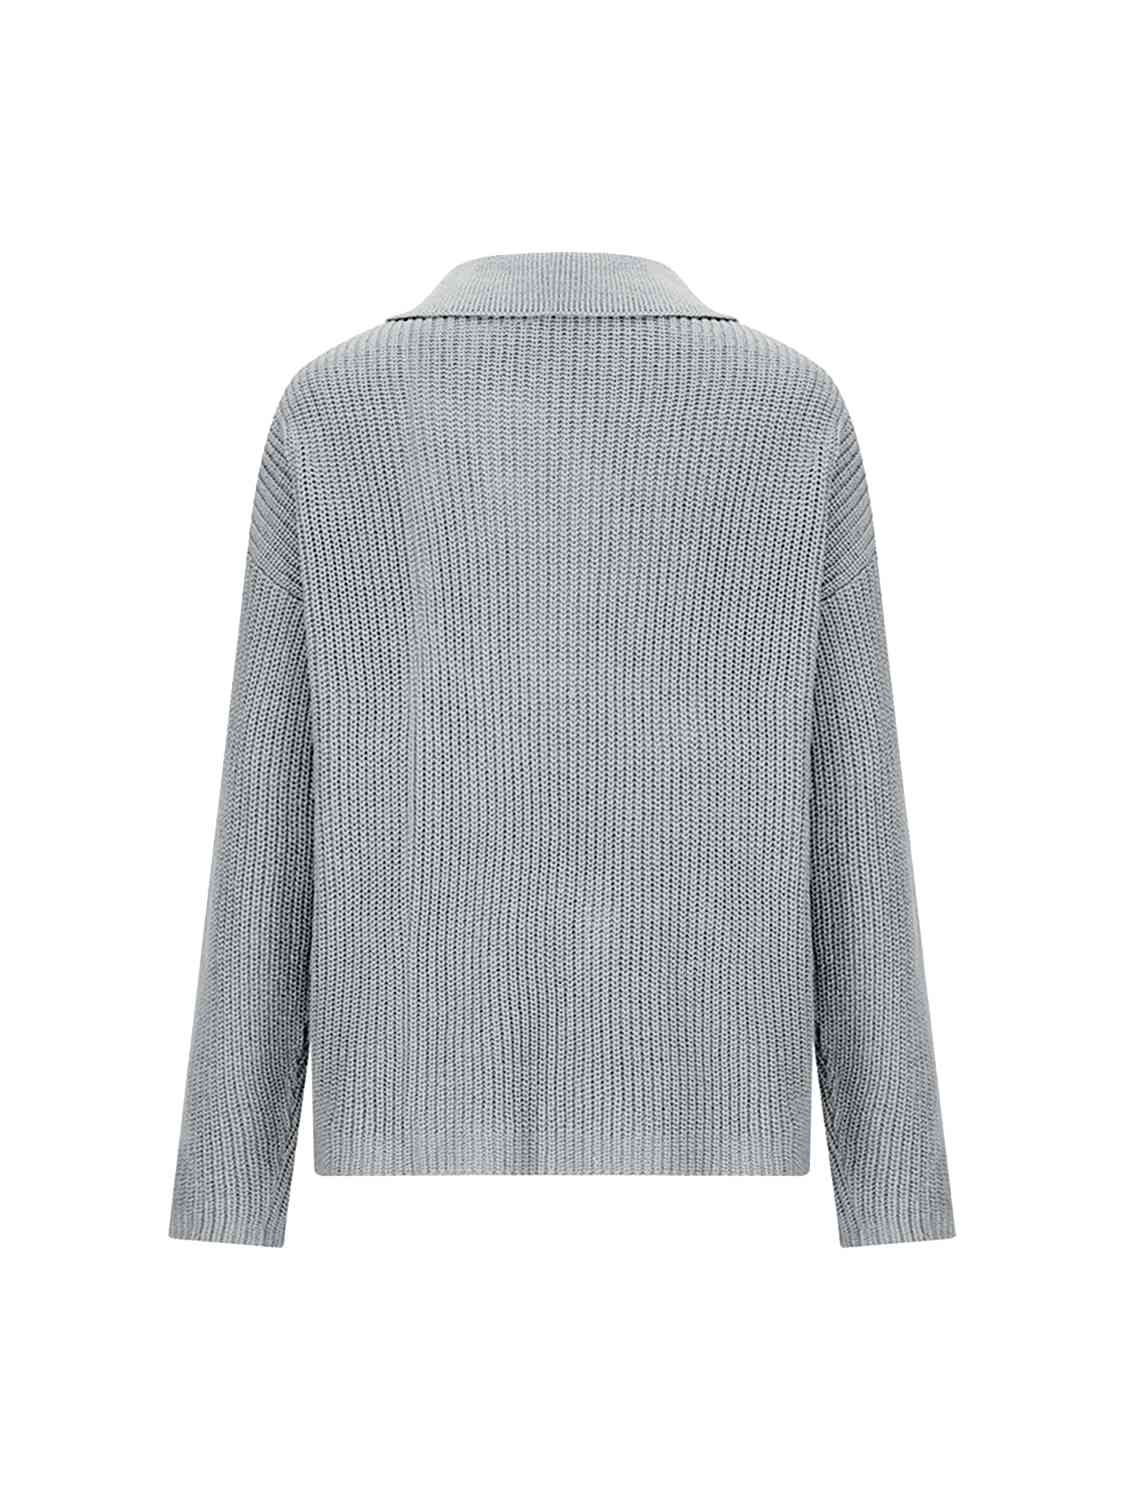 Collared Neck Half Button Knit Top